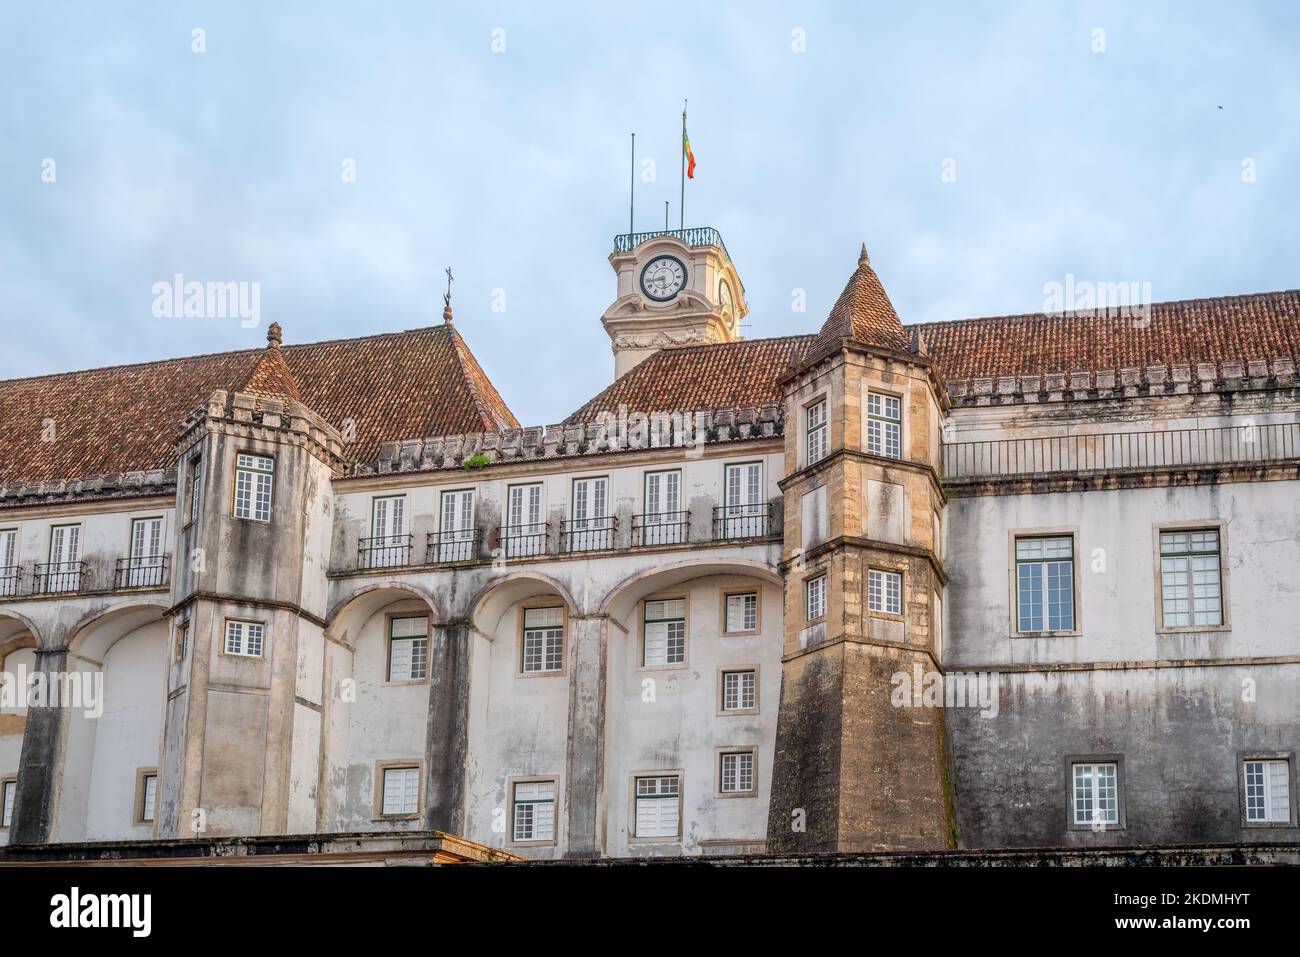 Exterior walls of Former Royal Palace now University of Coimbra - Coimbra, Portugal Stock Photo